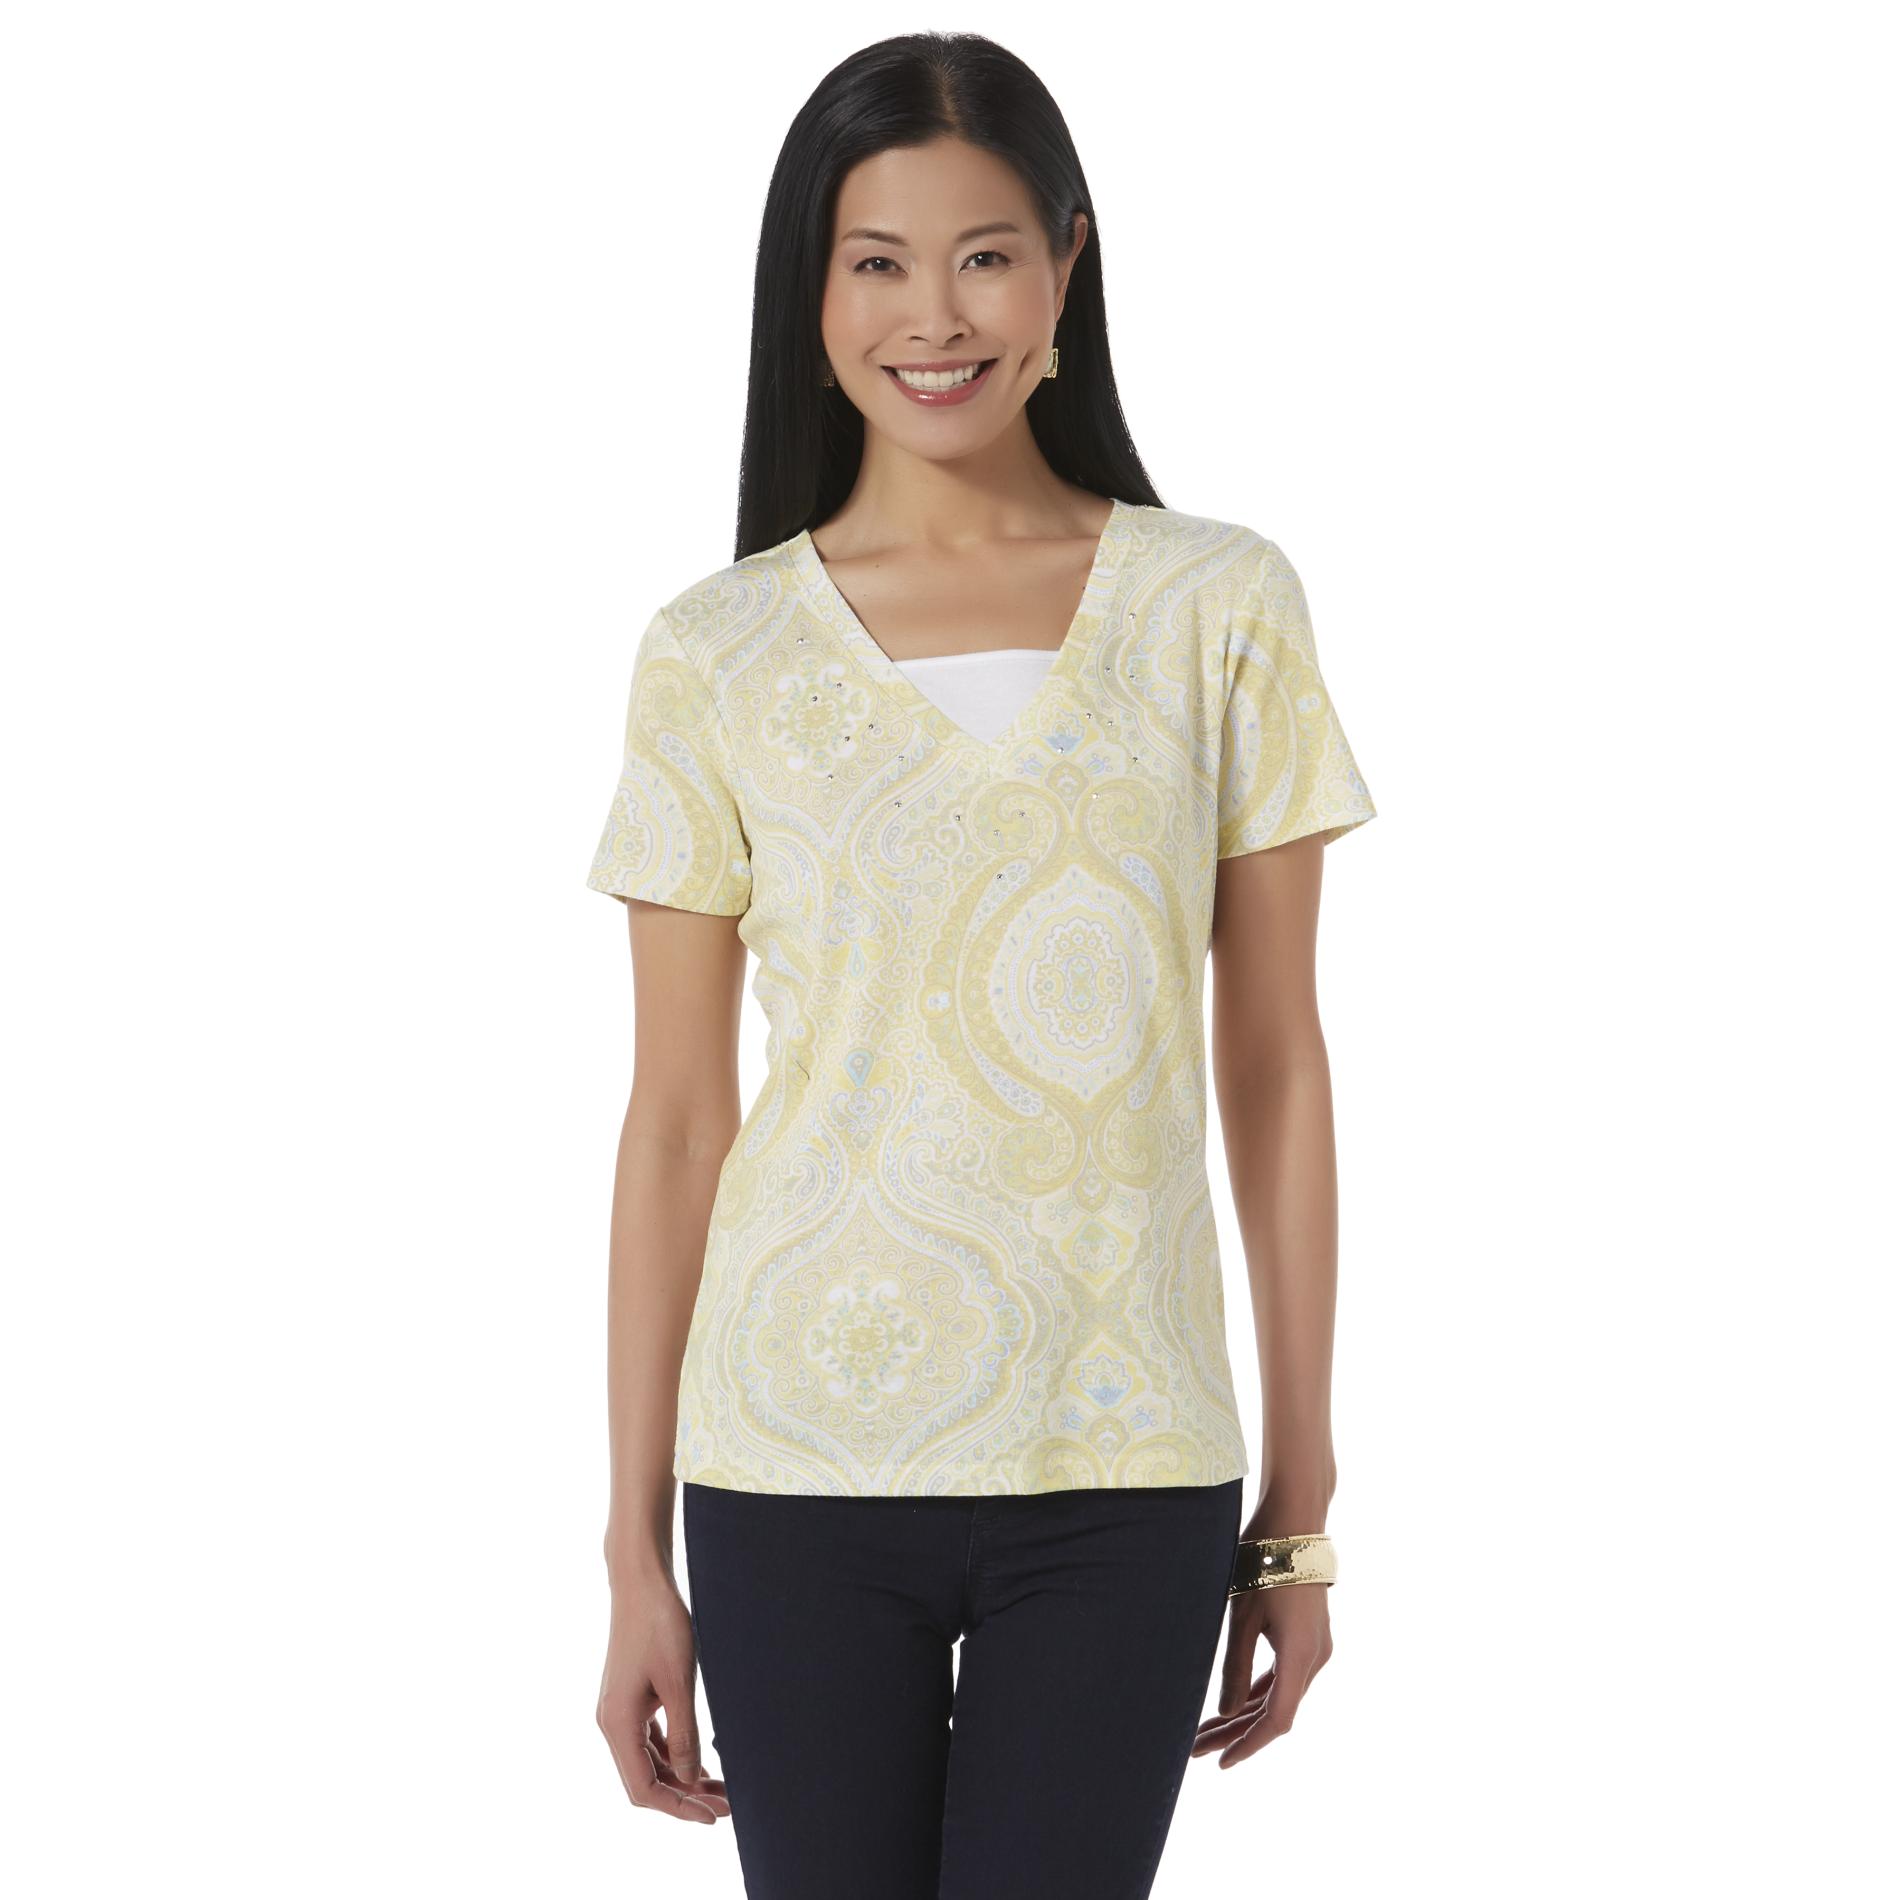 Basic Editions Women's Layered-Look V-Neck Top - Paisley Print